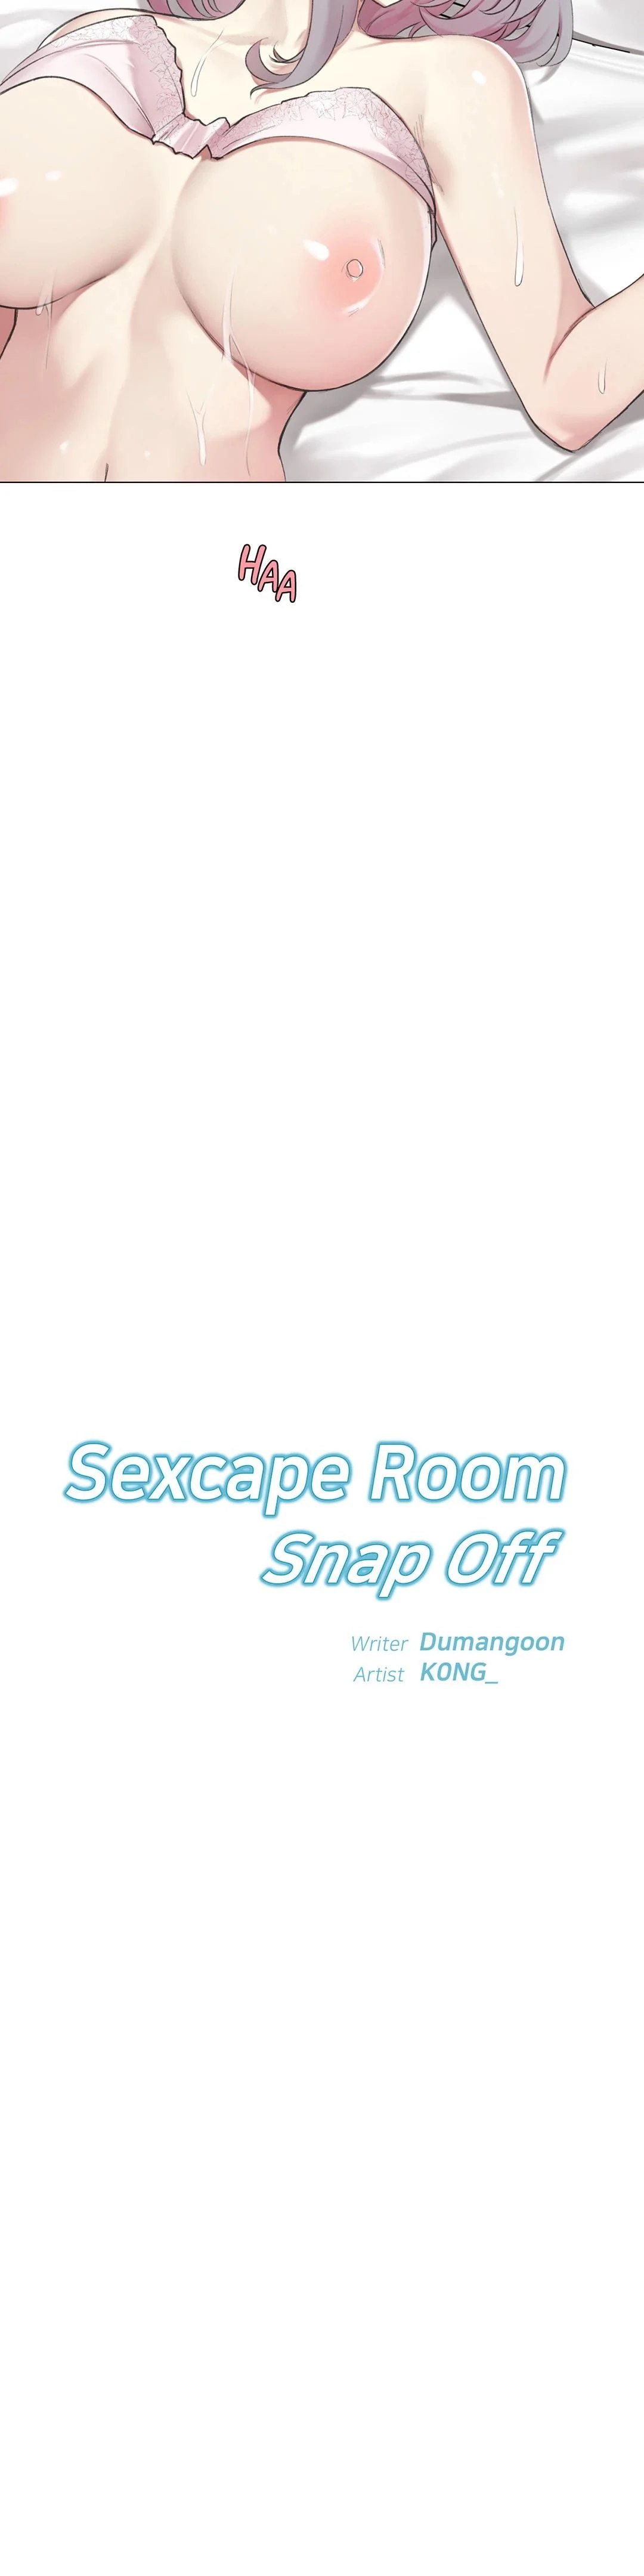 sexcape-room-snap-off-chap-4-9